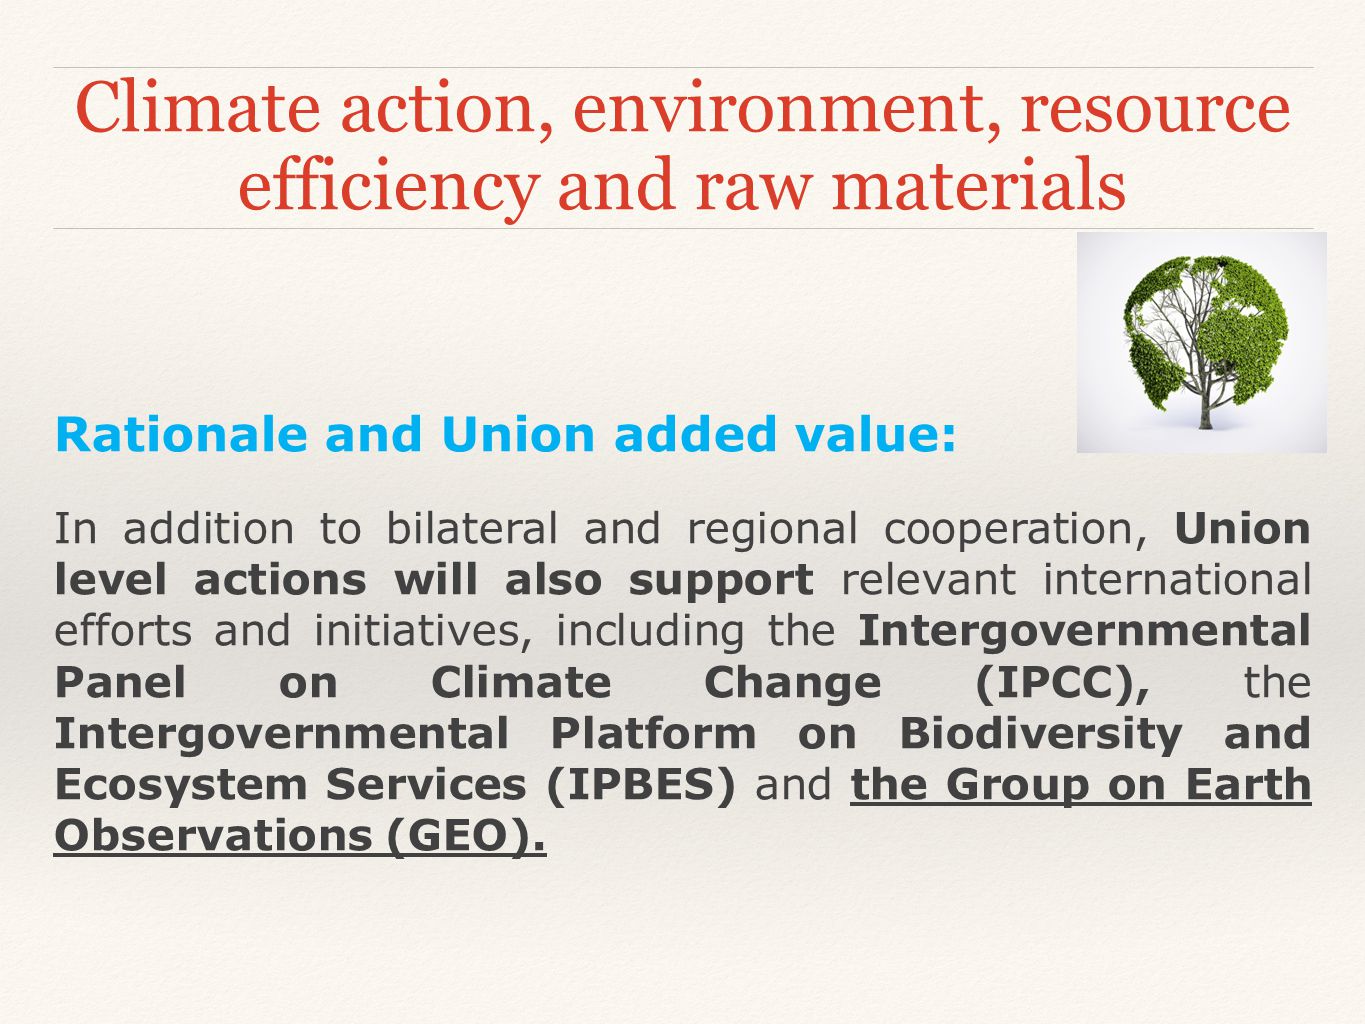 Climate action, environment, resource efficiency and raw materials Rationale and Union added value: In addition to bilateral and regional cooperation, Union level actions will also support relevant international efforts and initiatives, including the Intergovernmental Panel on Climate Change (IPCC), the Intergovernmental Platform on Biodiversity and Ecosystem Services (IPBES) and the Group on Earth Observations (GEO).